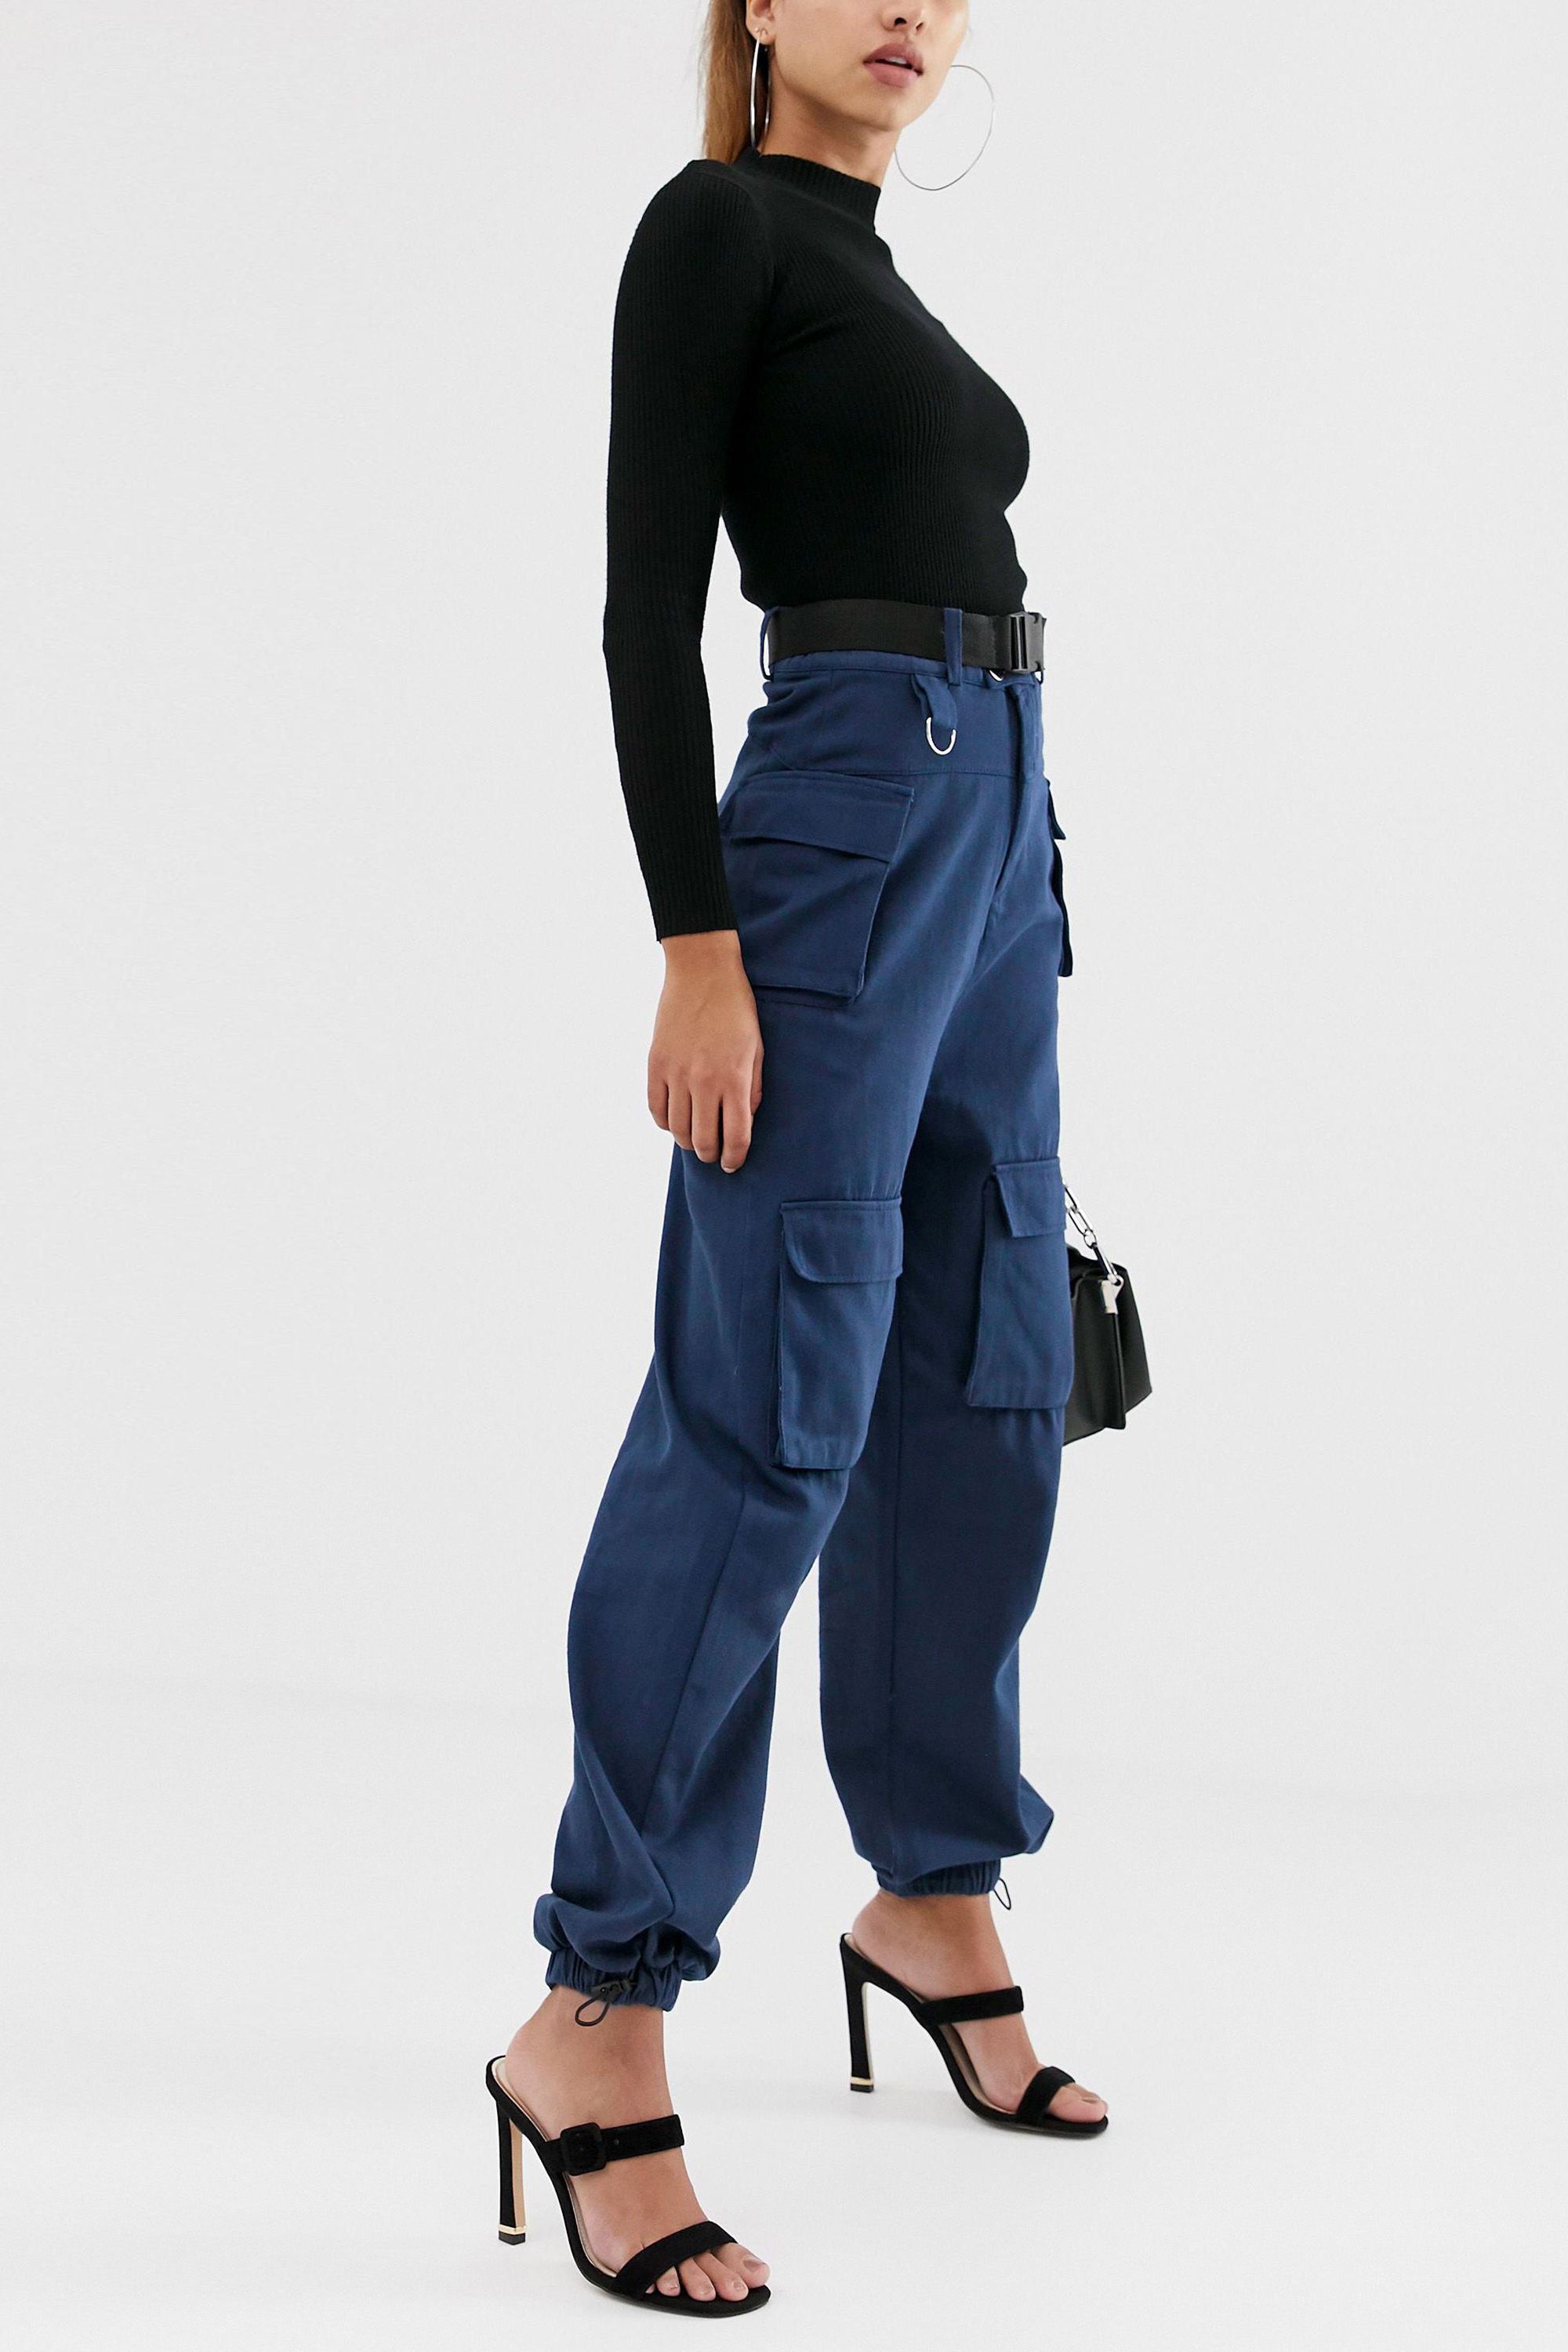 Missguided Croc Faux Leather Slim Leg Trousers | Brand Max